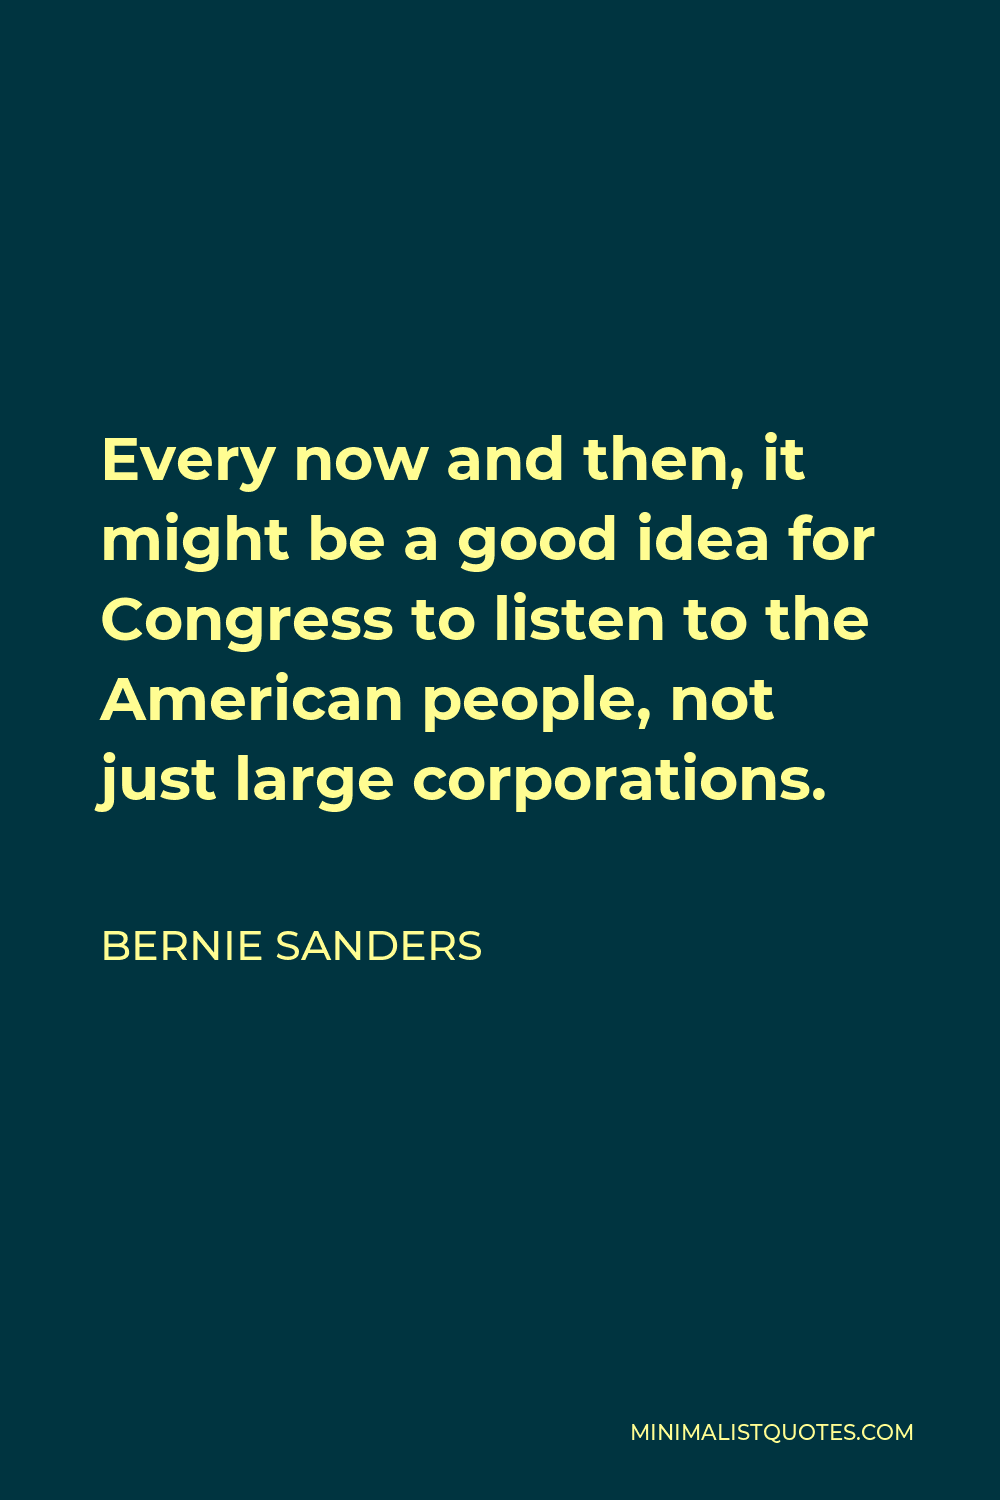 Bernie Sanders Quote - Every now and then, it might be a good idea for Congress to listen to the American people, not just large corporations.